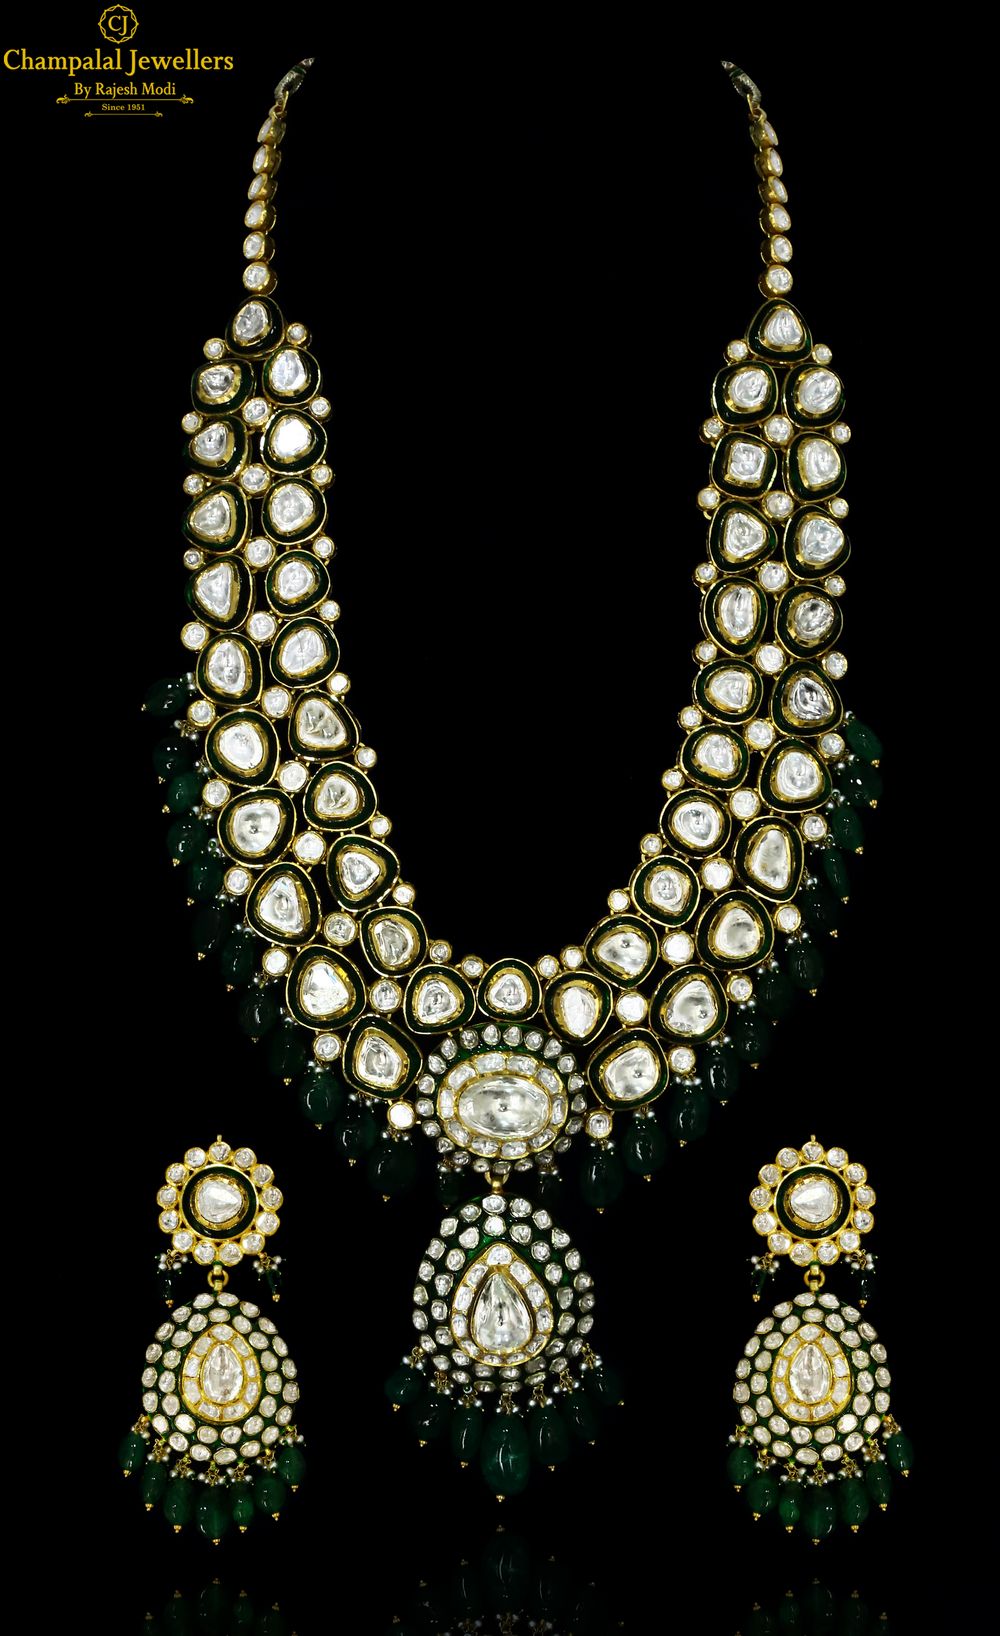 Photo From Majestic Greens - Polki Jewellery Collection by Champalal Jewellers by Rajesh Modi - By Champalal Jewellers by Rajesh Modi